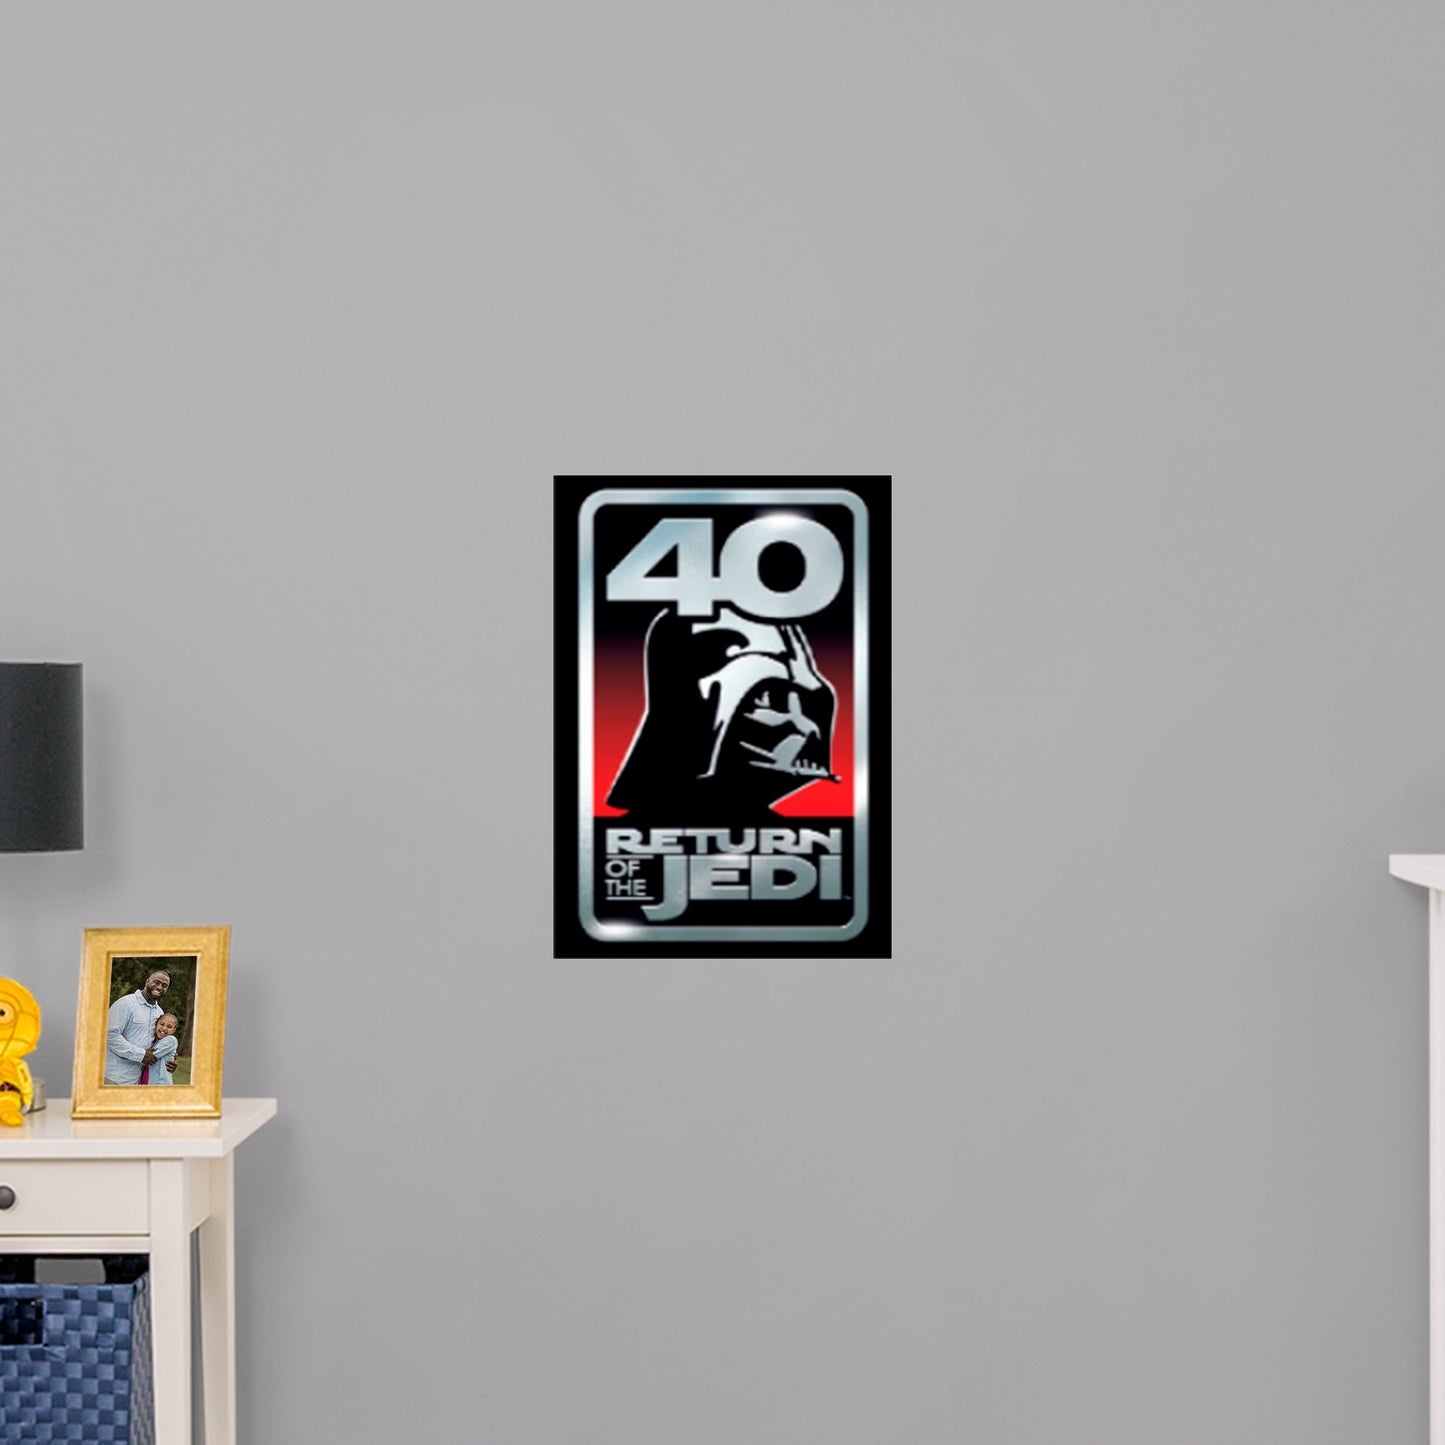 Return of the Jedi 40th: 40 Icon Poster - Officially Licensed Star Wars Removable Adhesive Decal